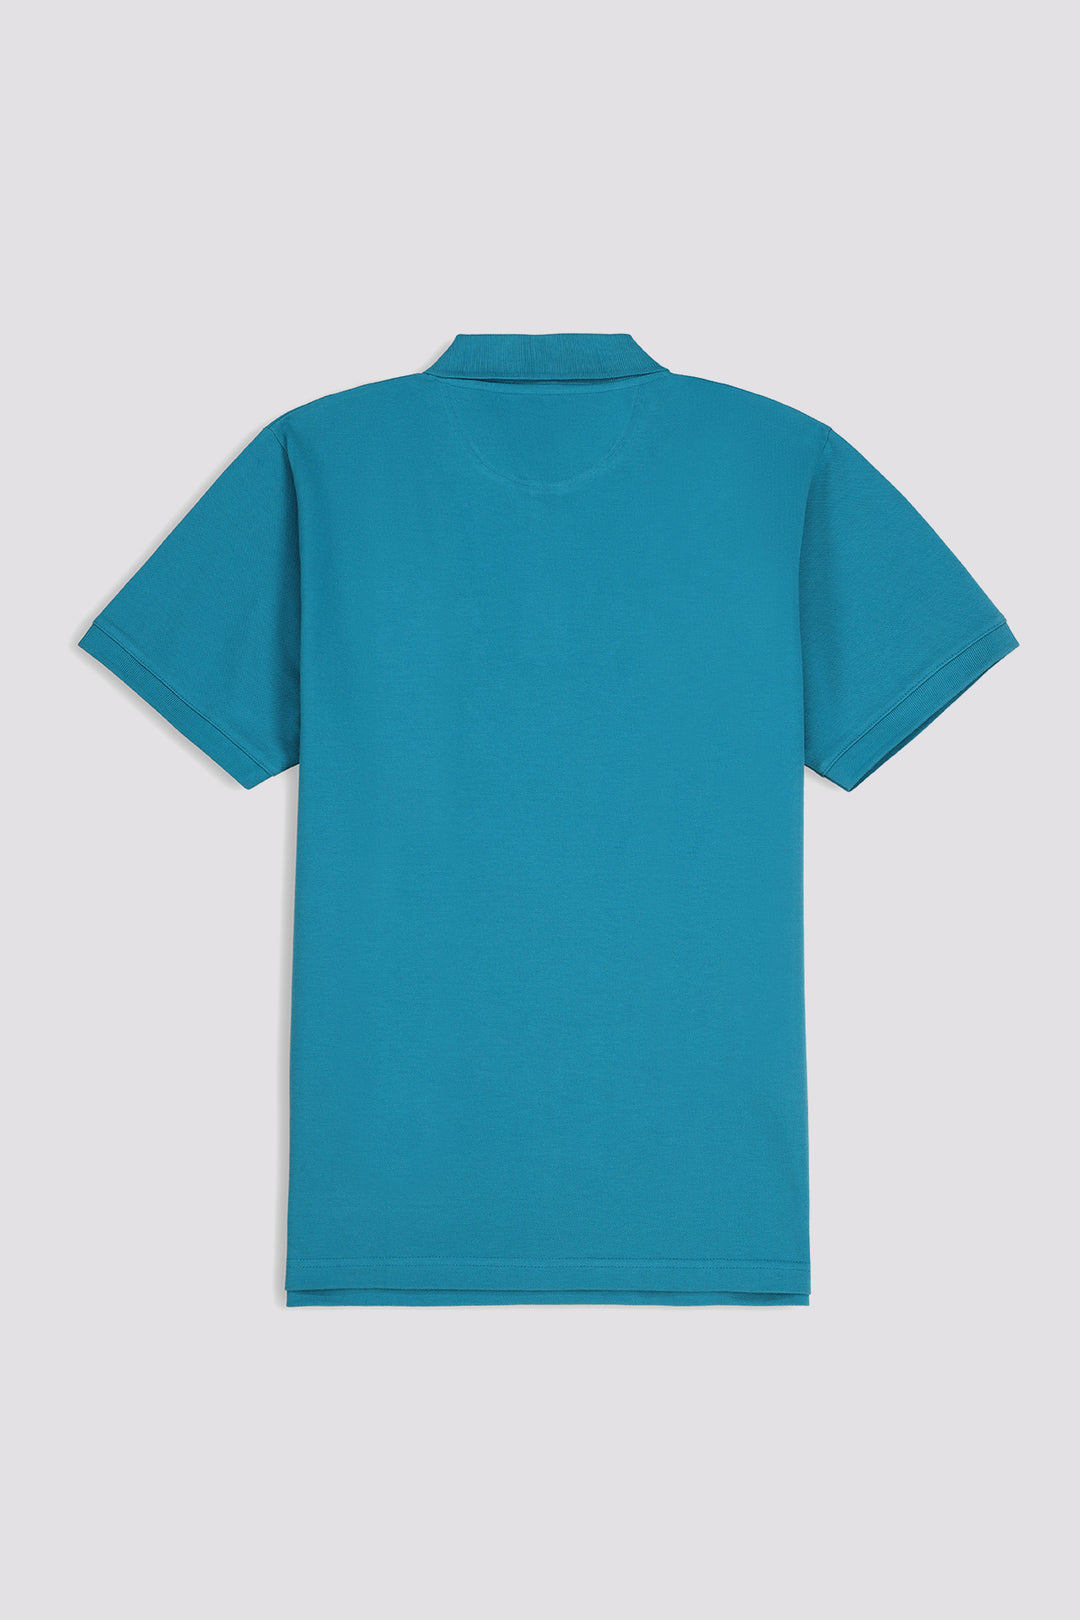 Teal Embroidered Polo Shirt - S23 - MP0216R